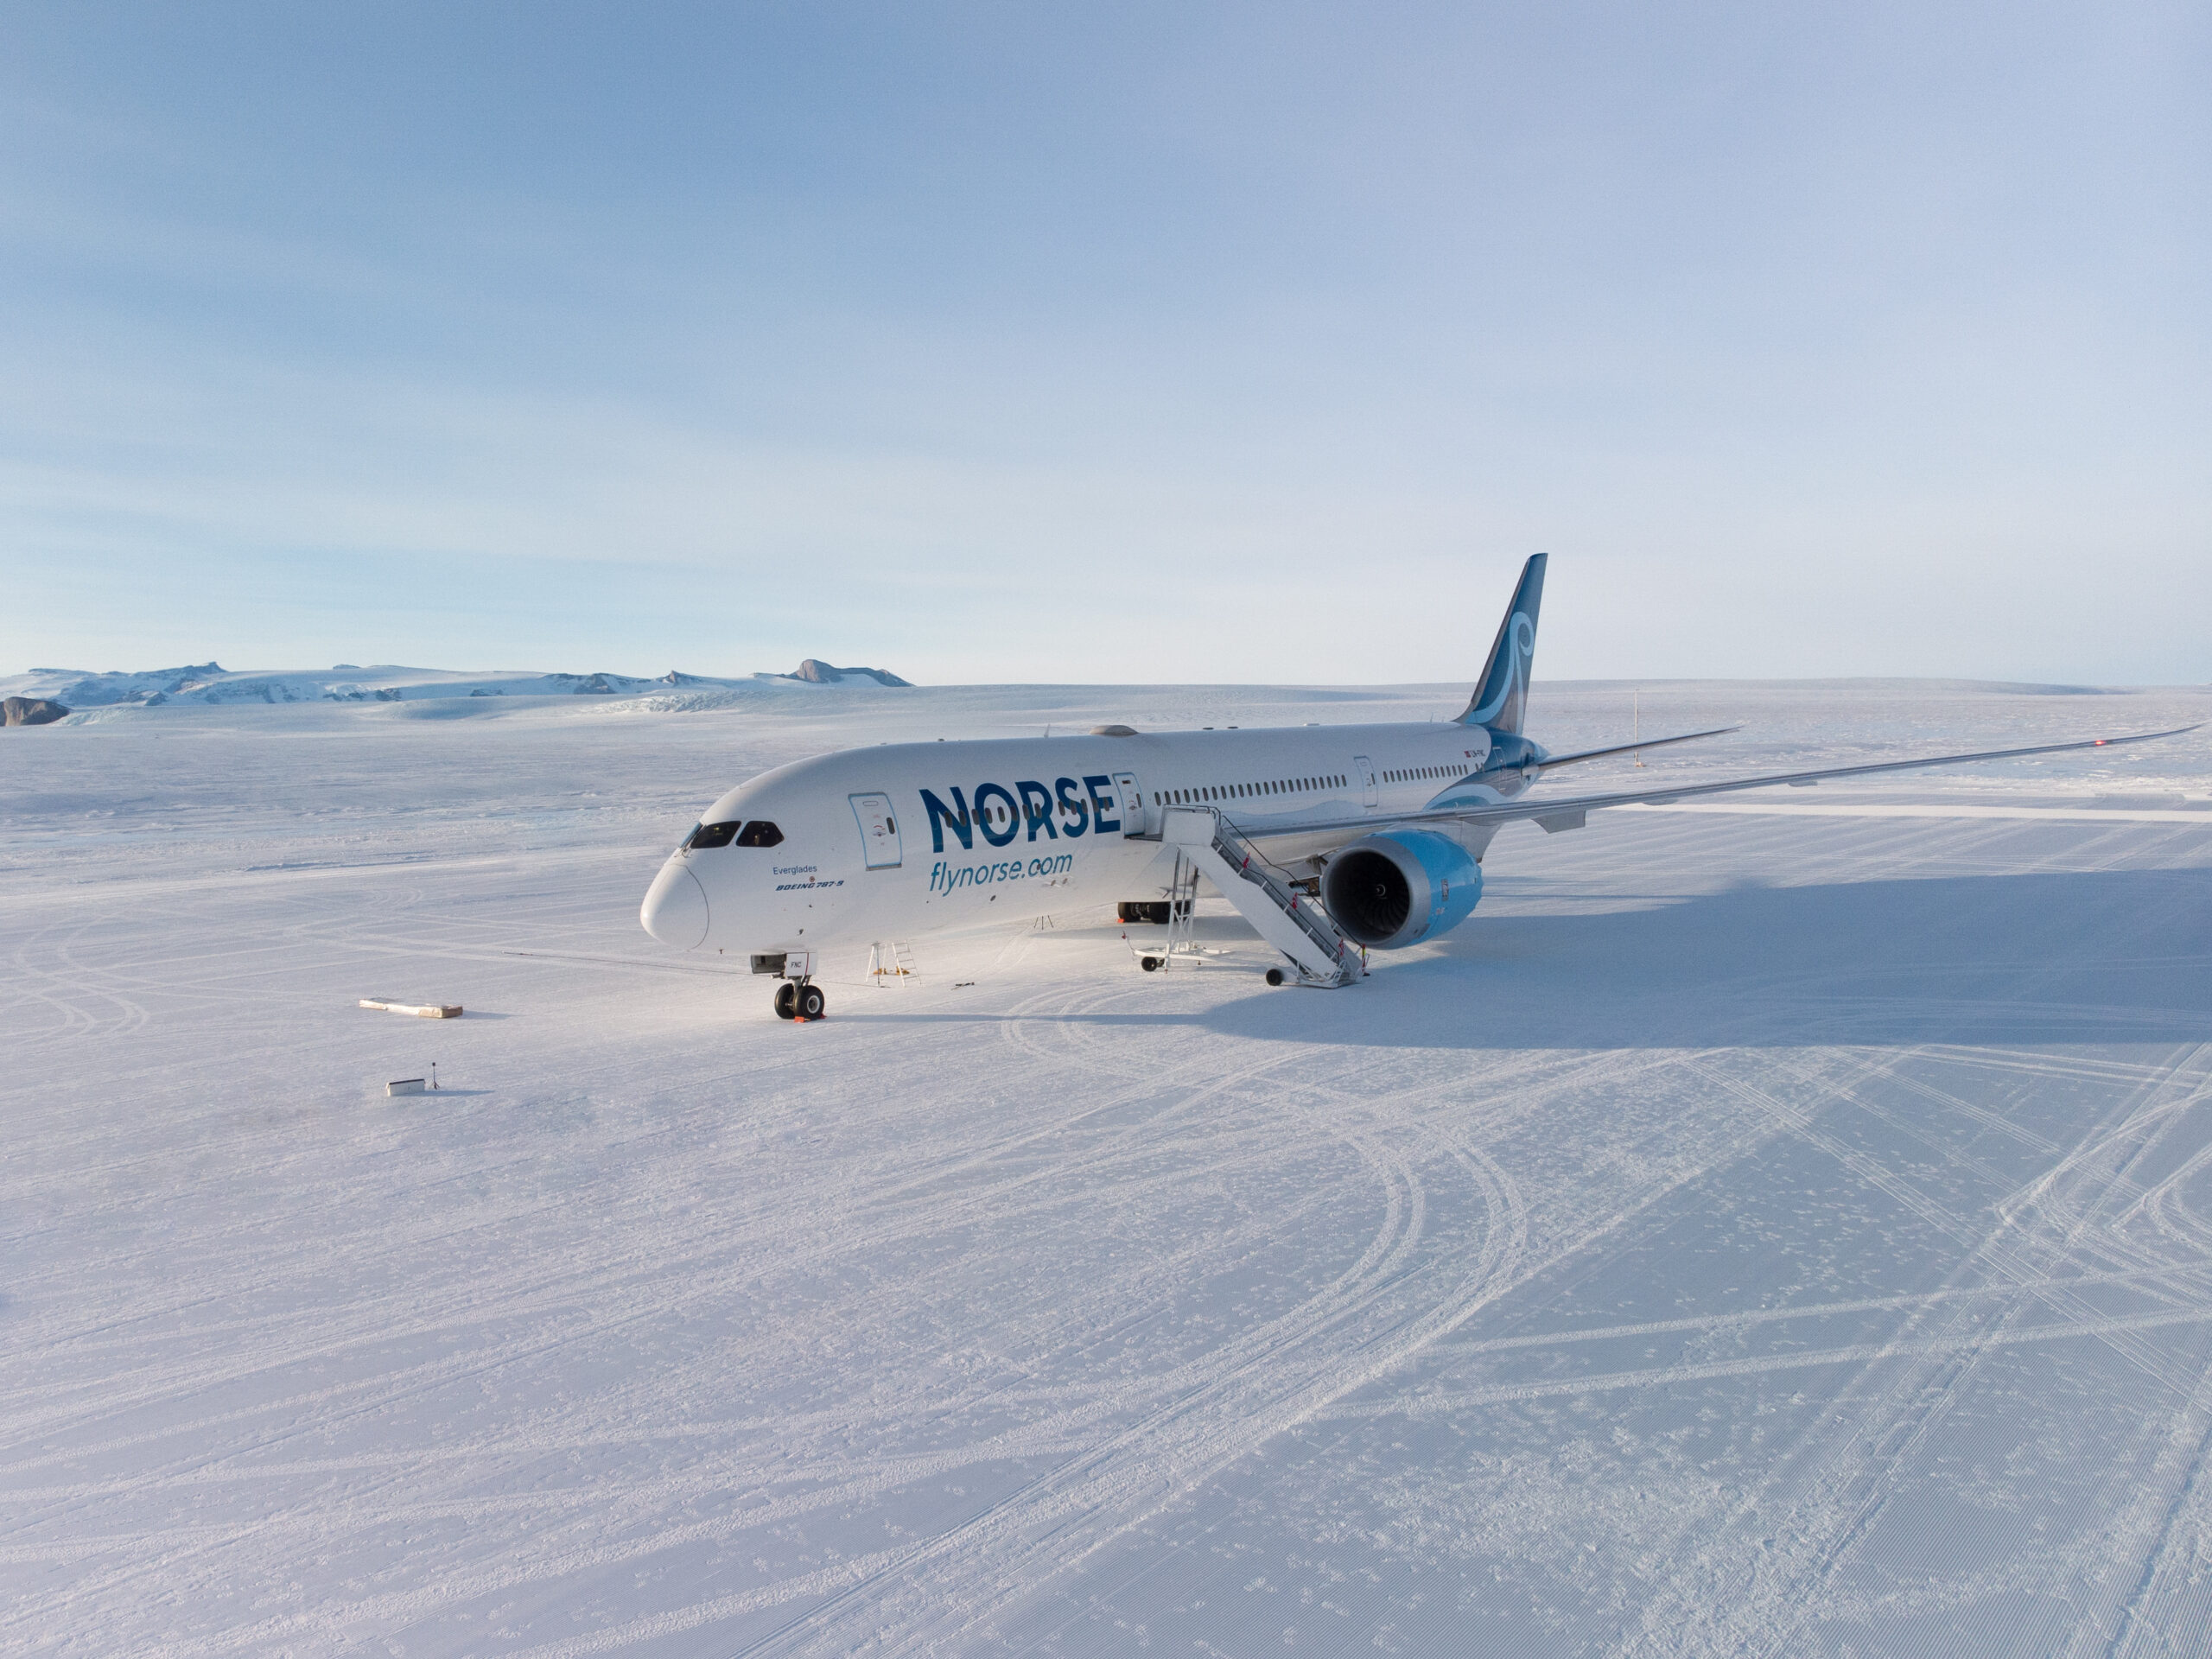 Norse Atlantic will fully replace the aircraft paper technical log, cabin log, journey log and fuelling logs with ULTRAMAIN ELB © Ultramain Systems